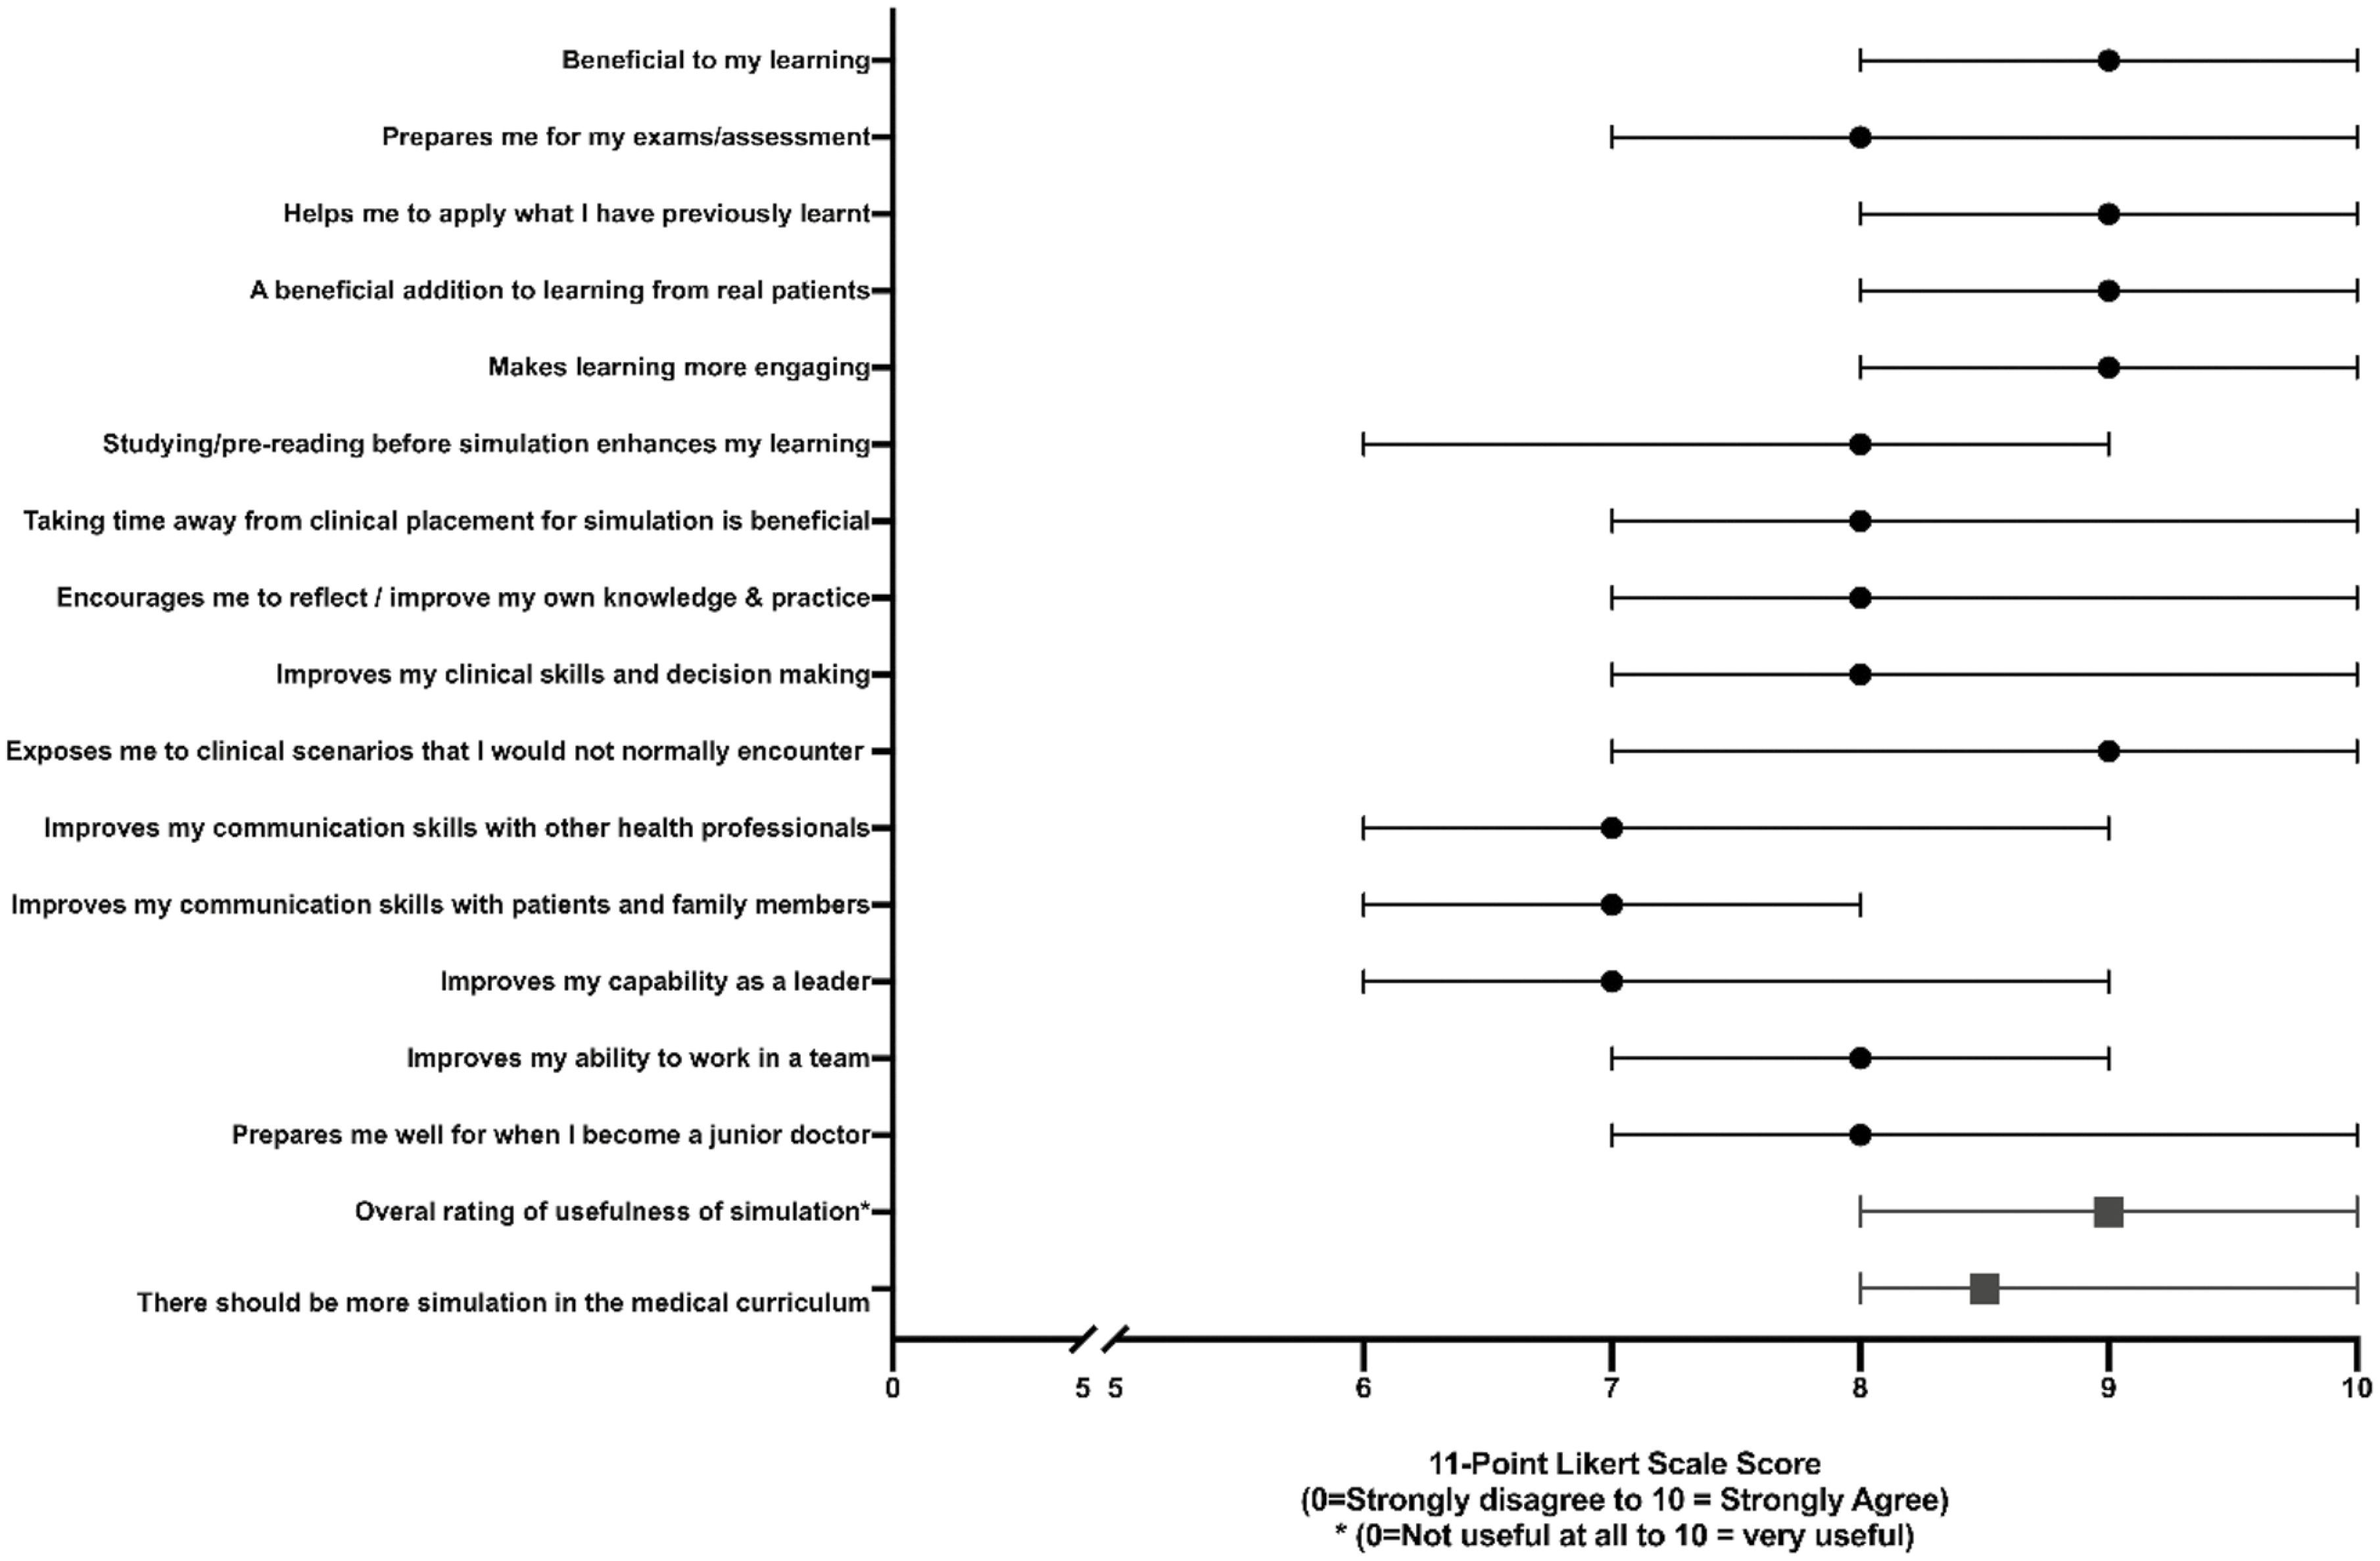 Students’ responses assessing medical student perception and attitudes towards SBE (11-point Likert scale)